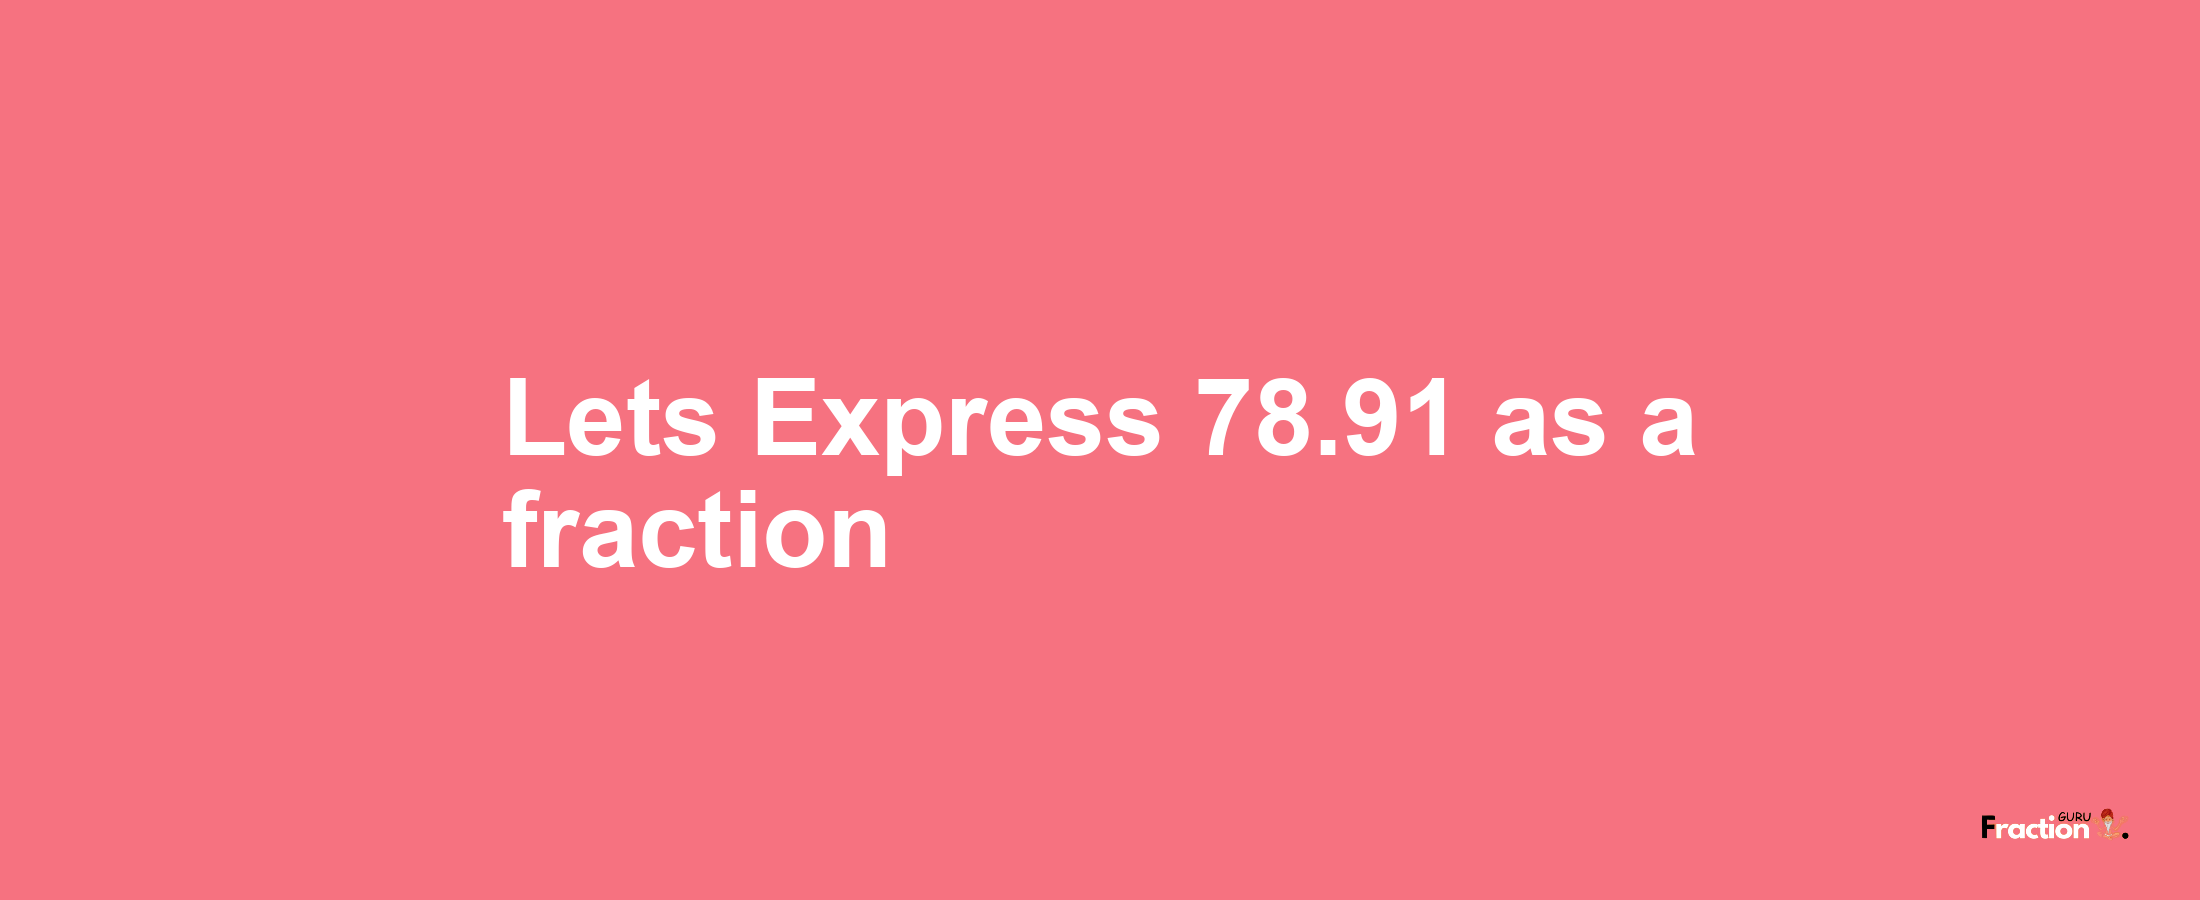 Lets Express 78.91 as afraction